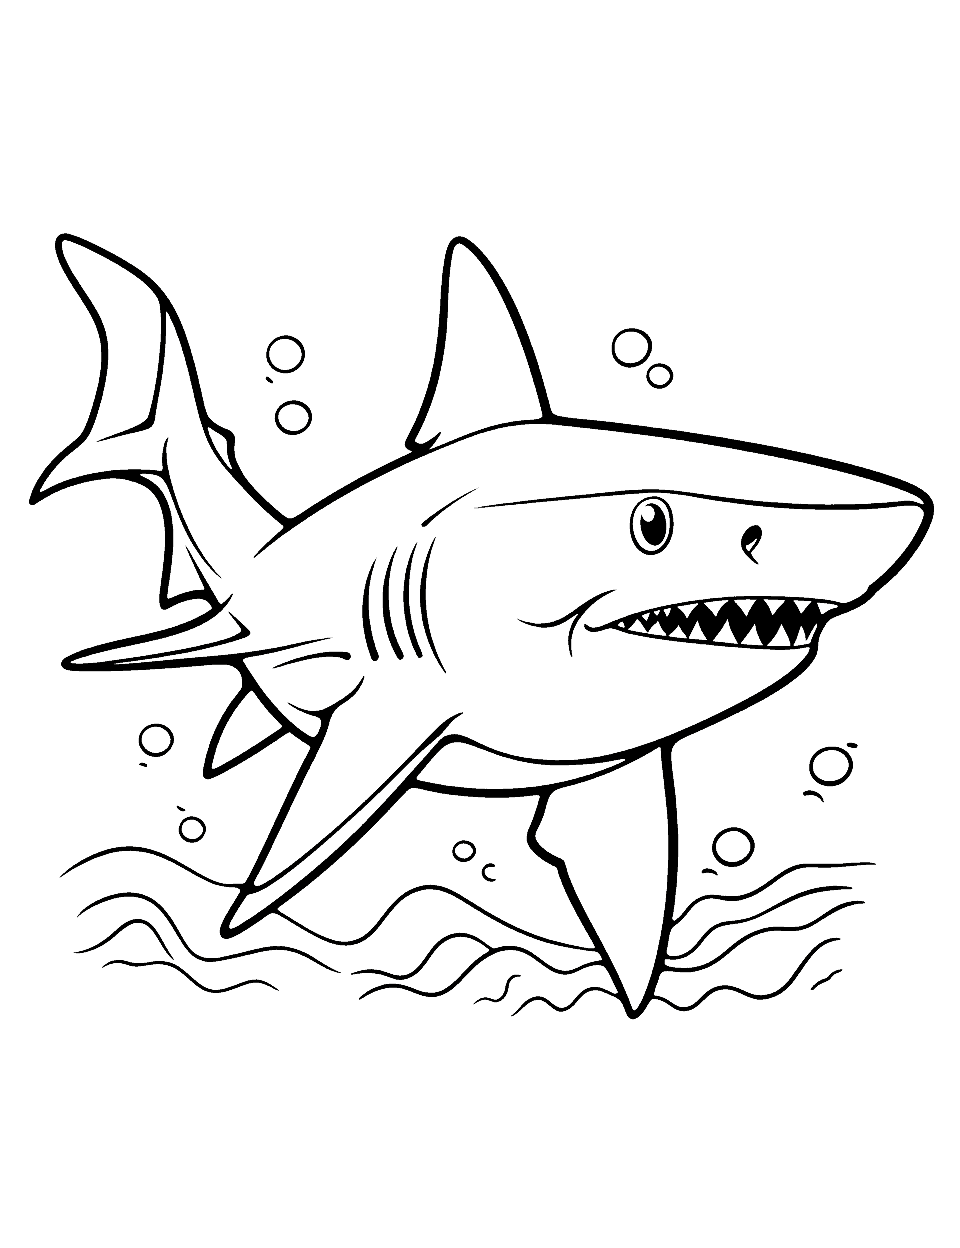 Black Tip Shark's Daredevil Jump Shark Coloring Page - A black tip shark making a daring leap out of the ocean.